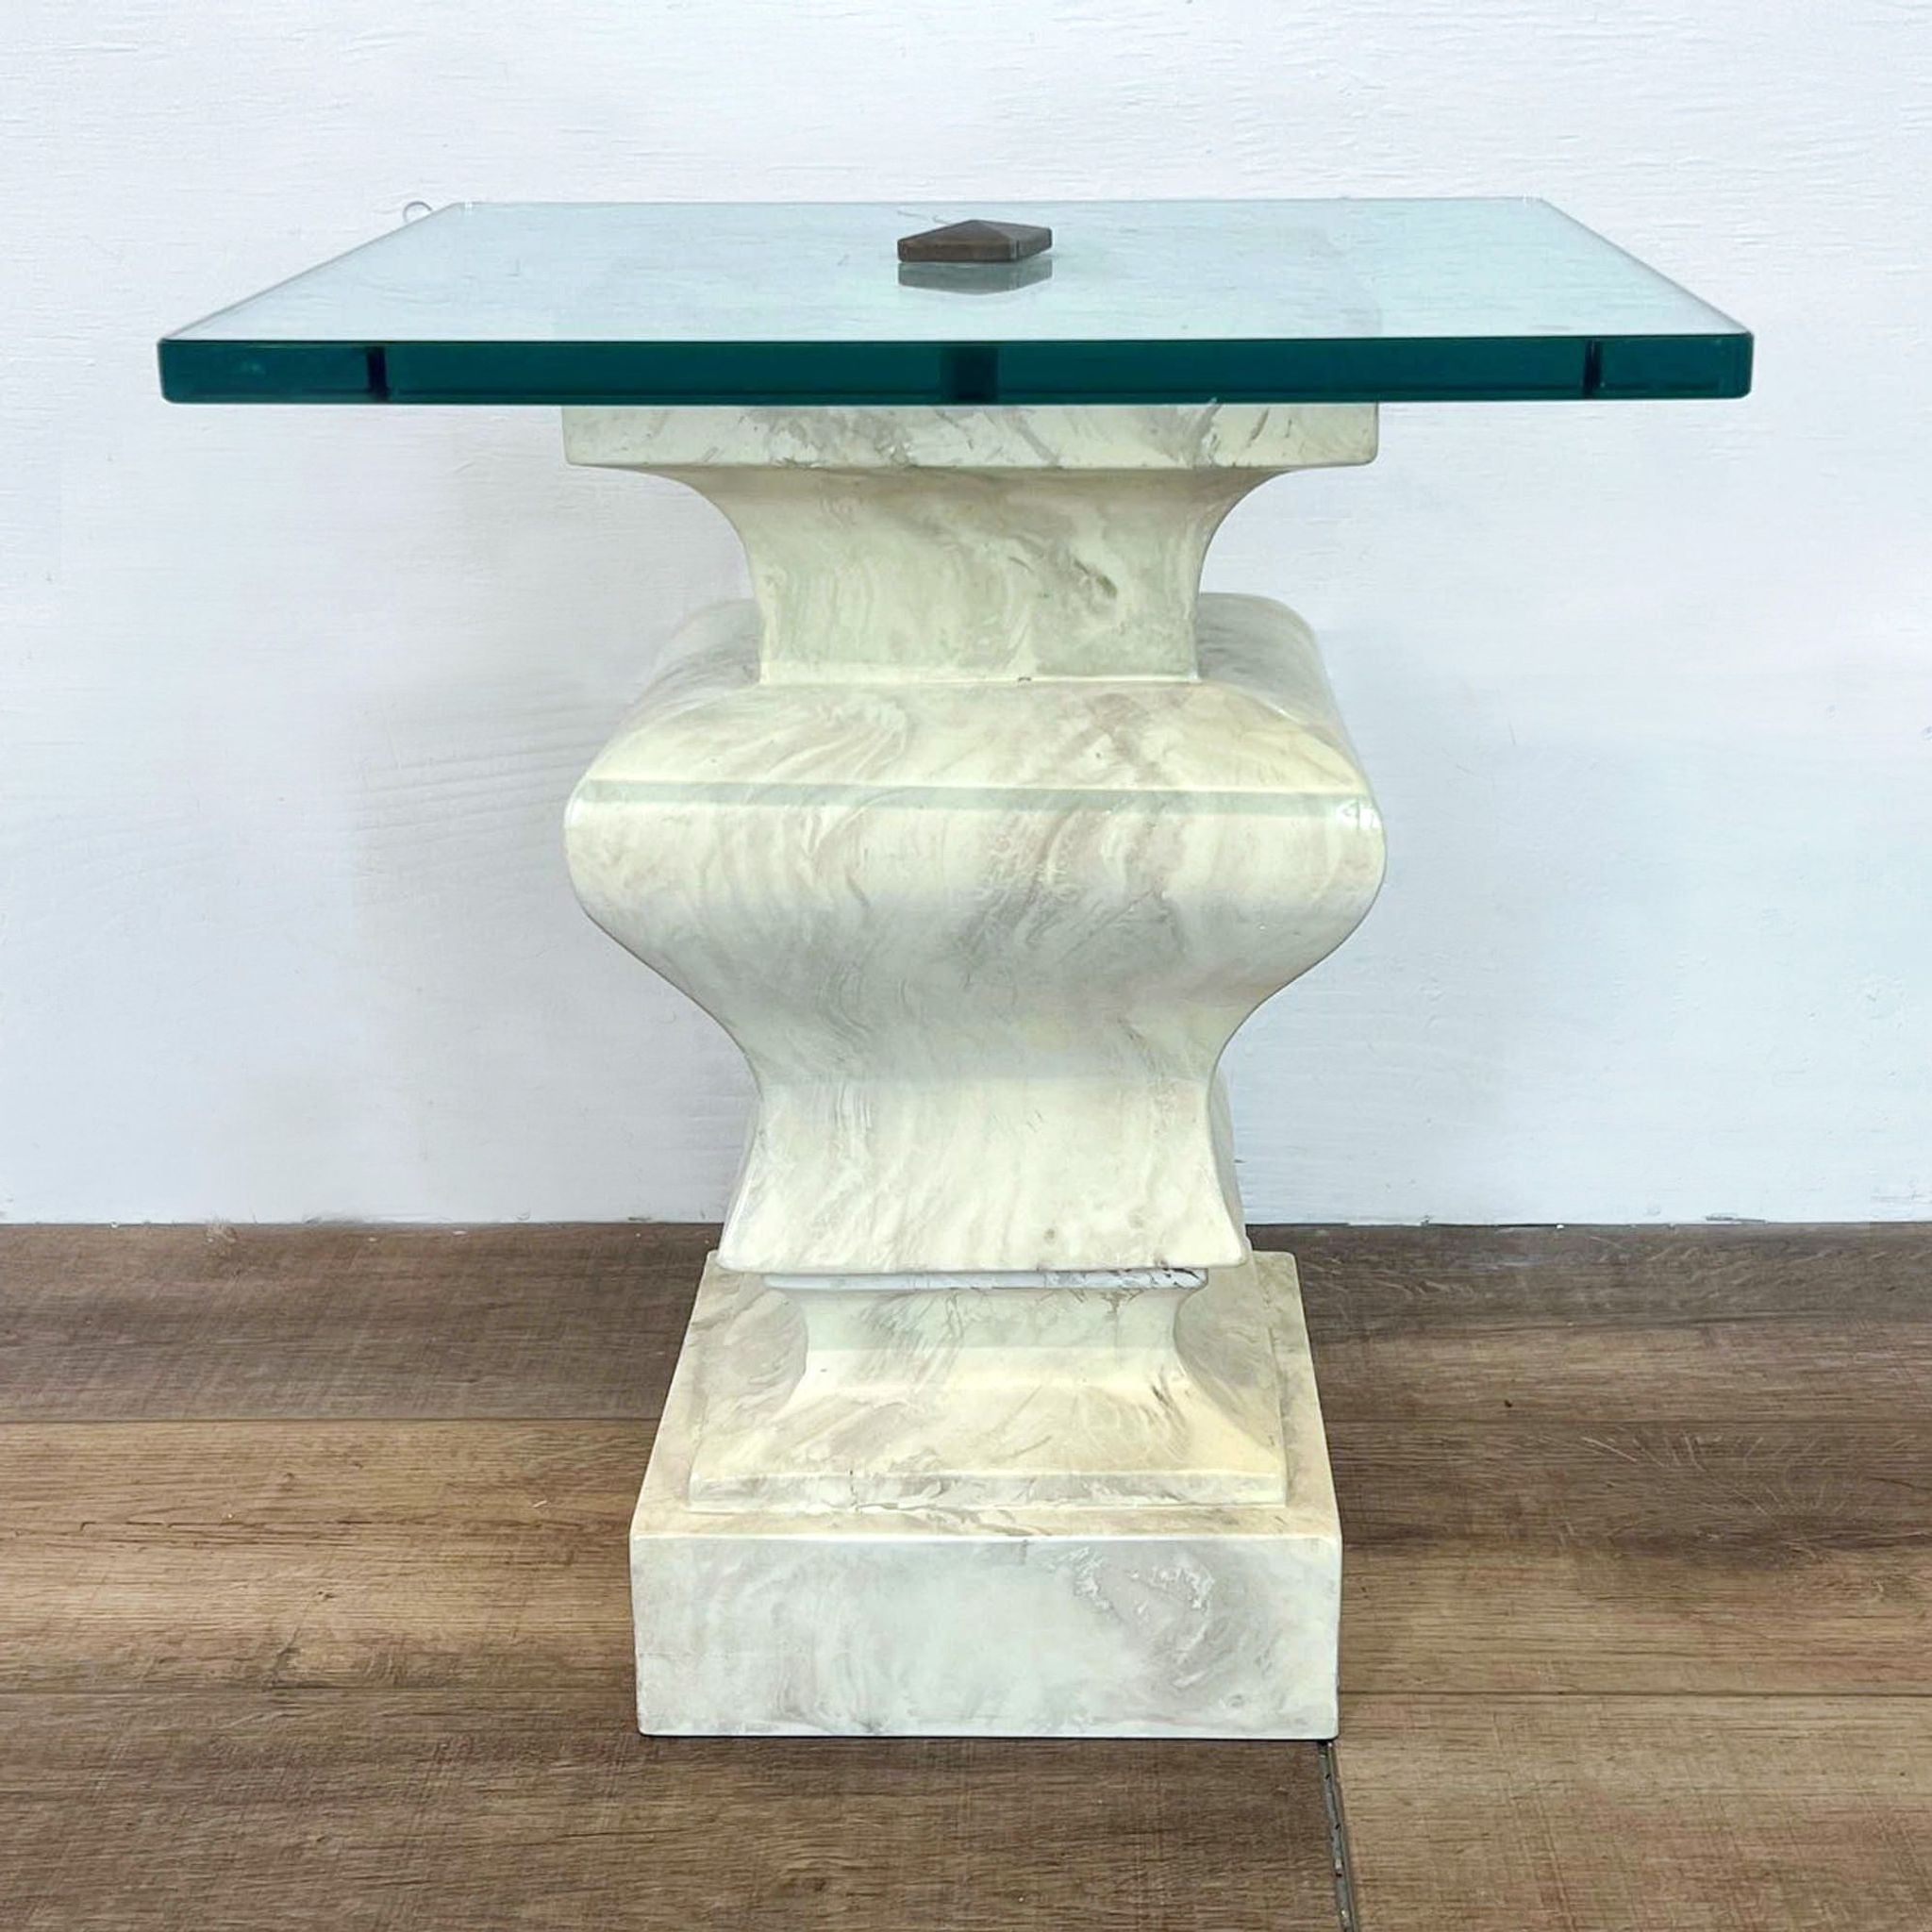 Reperch marble end table with a square, teal tinted glass top and a sculpted base on a wooden floor.